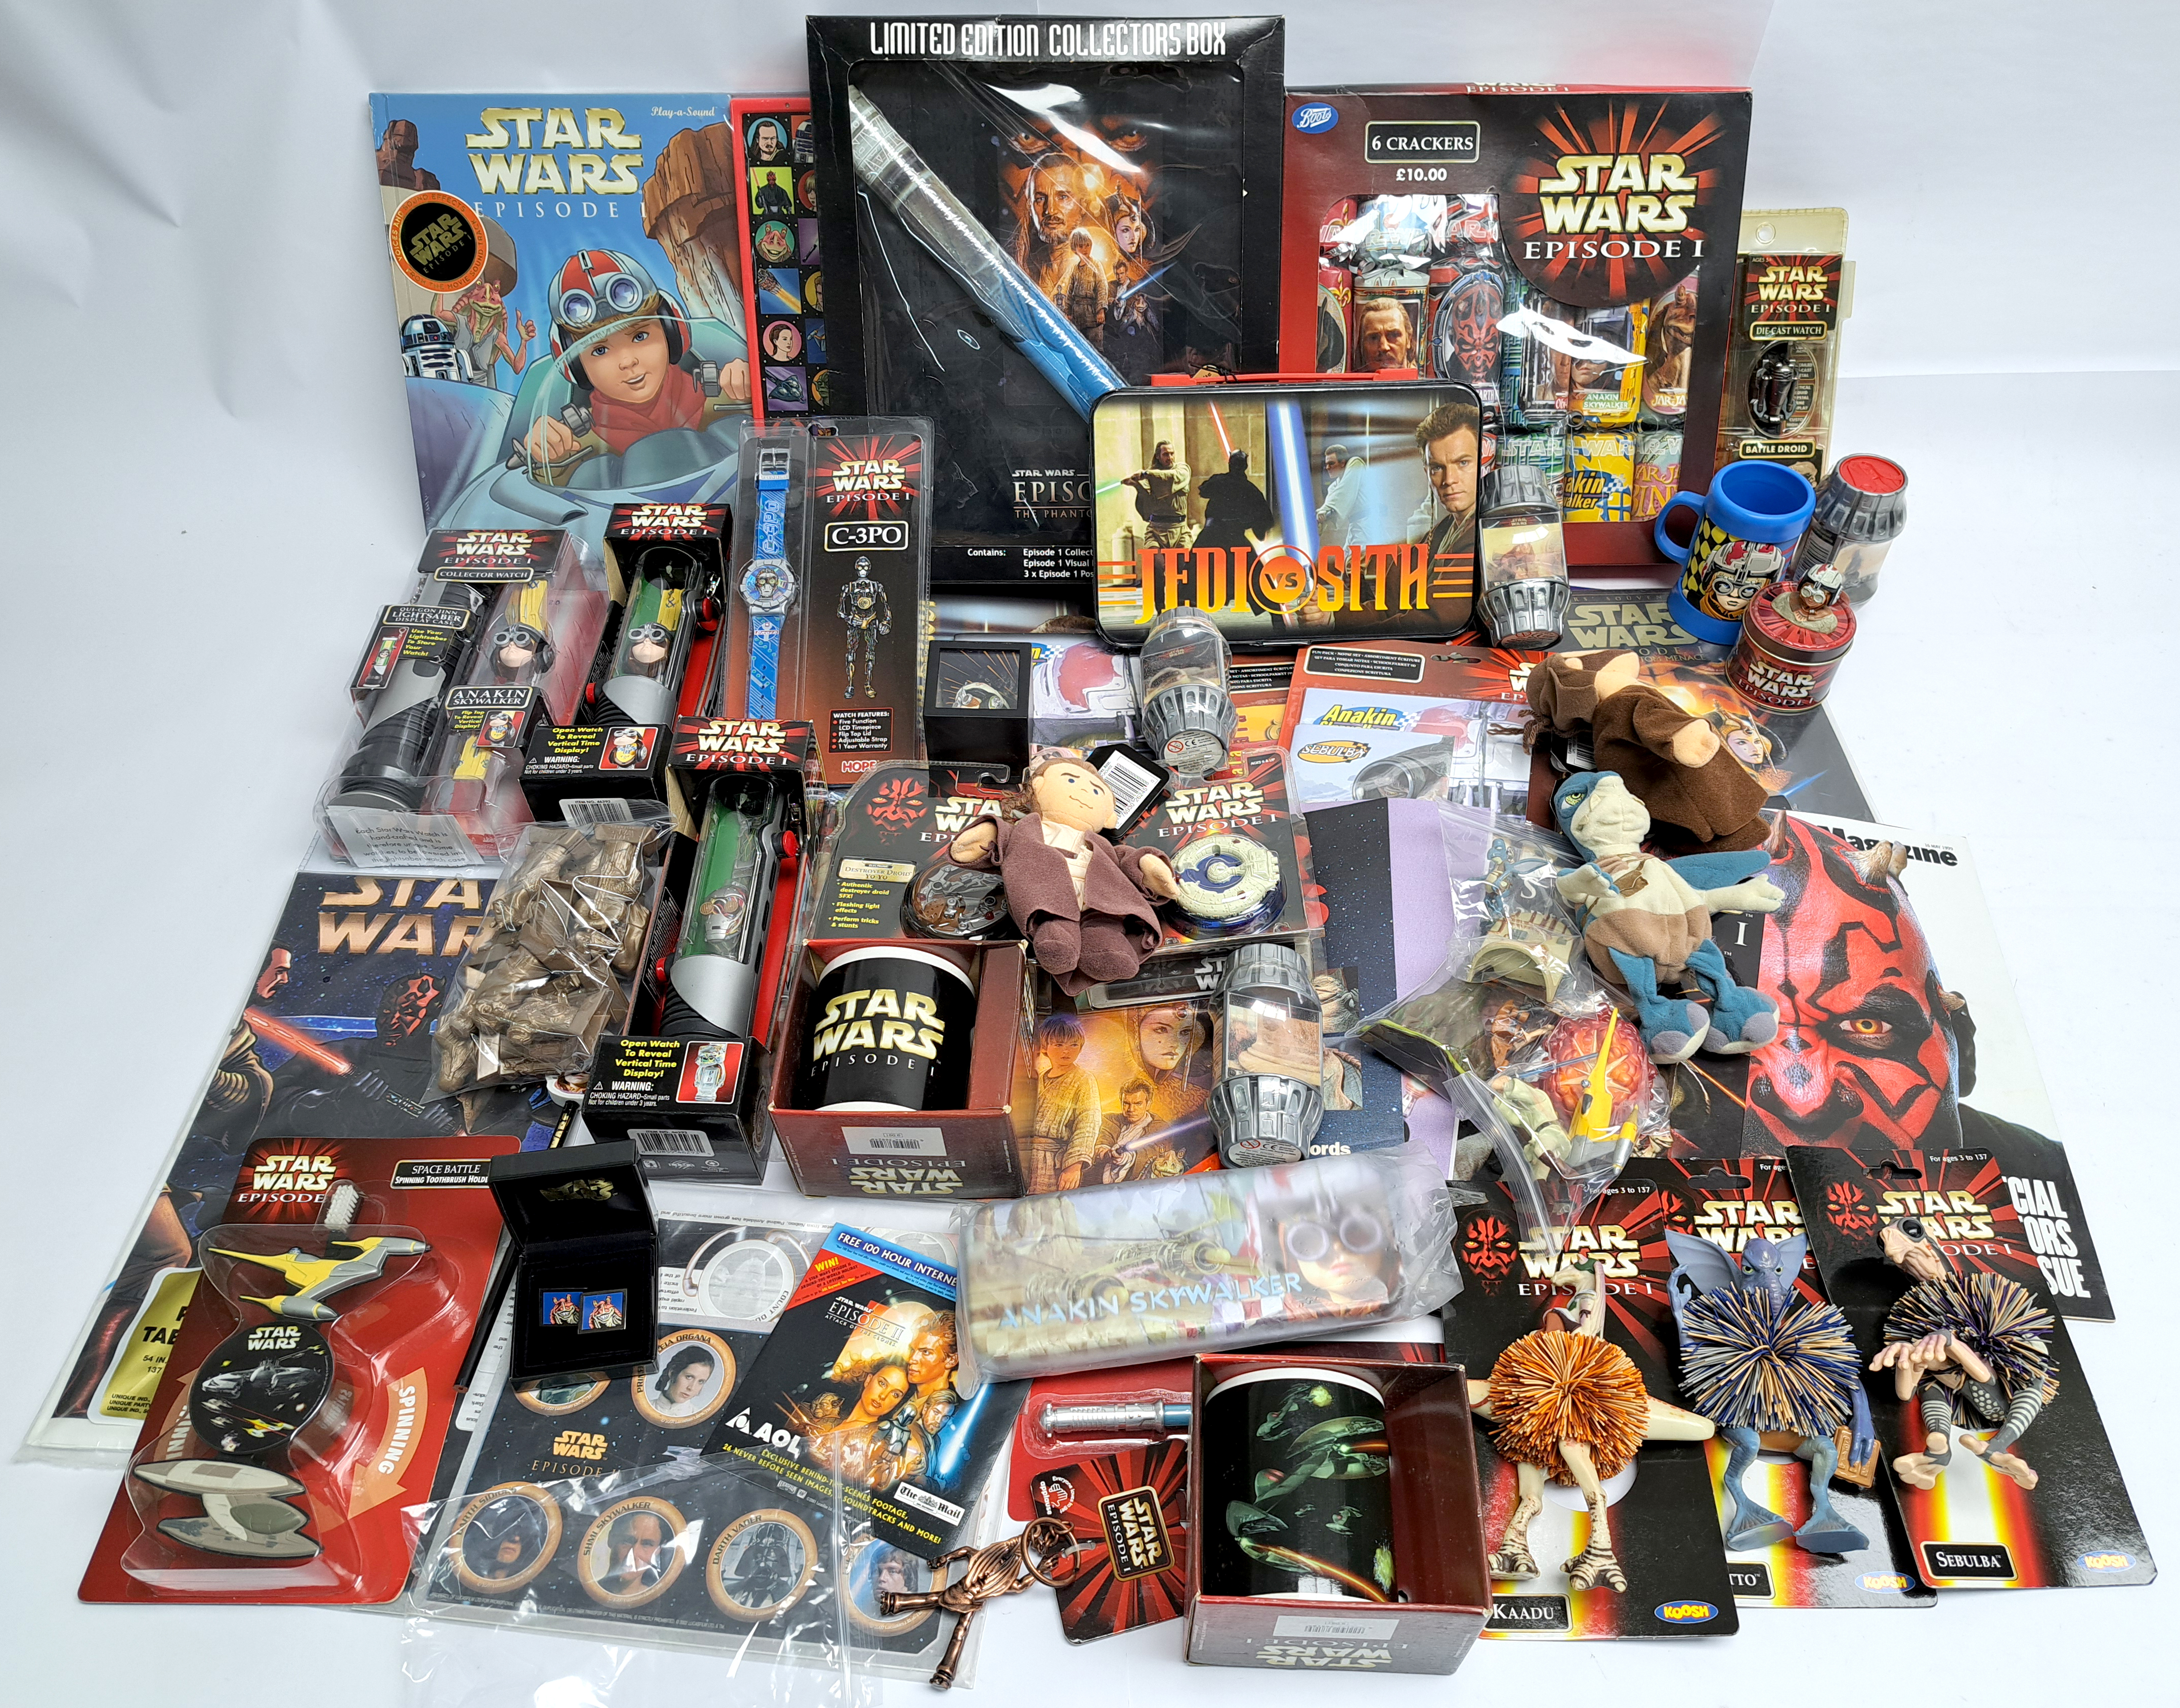 Hasbro, Tiger, Star Wars Episode 1 collectibles mixed lot Excellent to near mint.